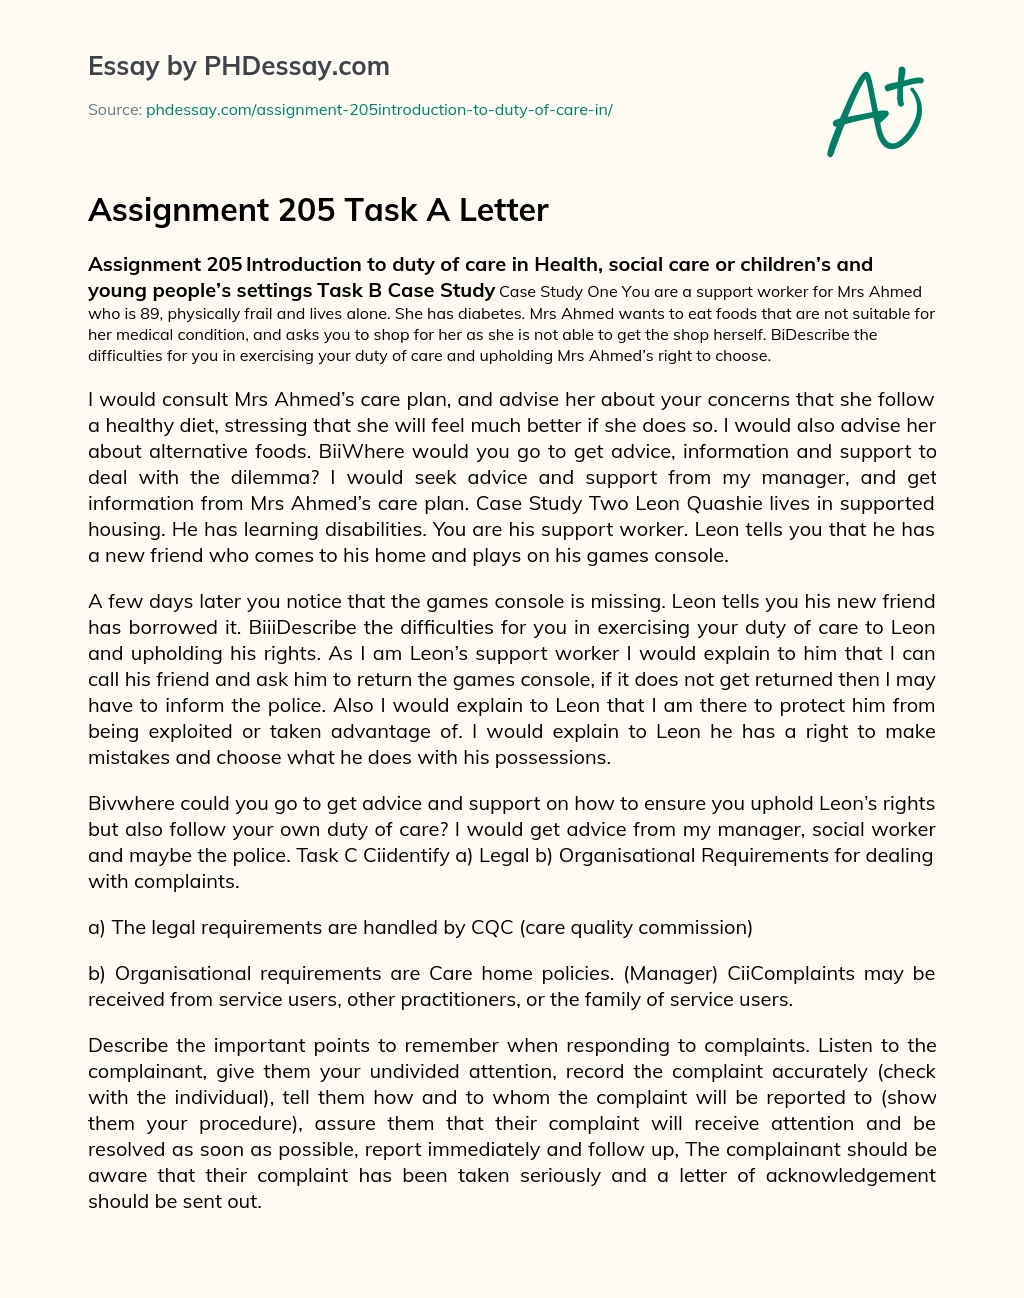 Assignment 205 Task A Letter essay